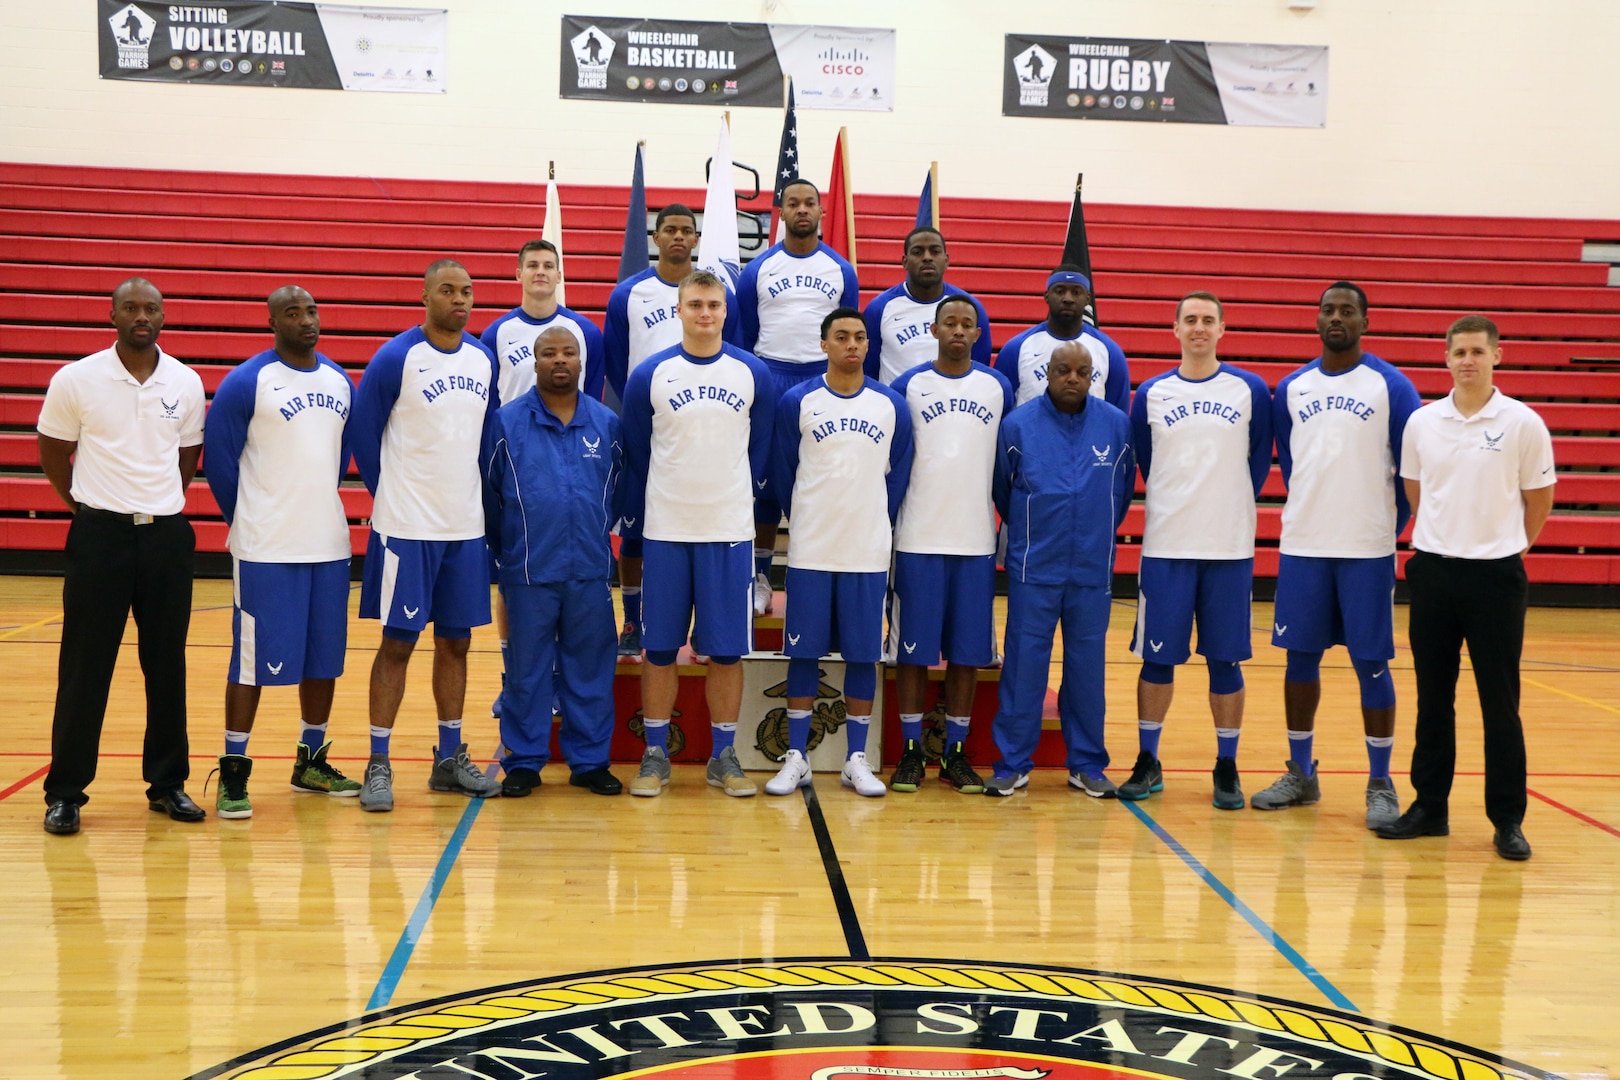 U.S. All-Air Force Men's Basketball Team.  The 2016 Armed Forces Men's Basketball Championship held at MCB Quantico, Va. from 1-7 November.  The best two teams during the doubel round robin will face each other for the 2016 Armed Forces crown.  